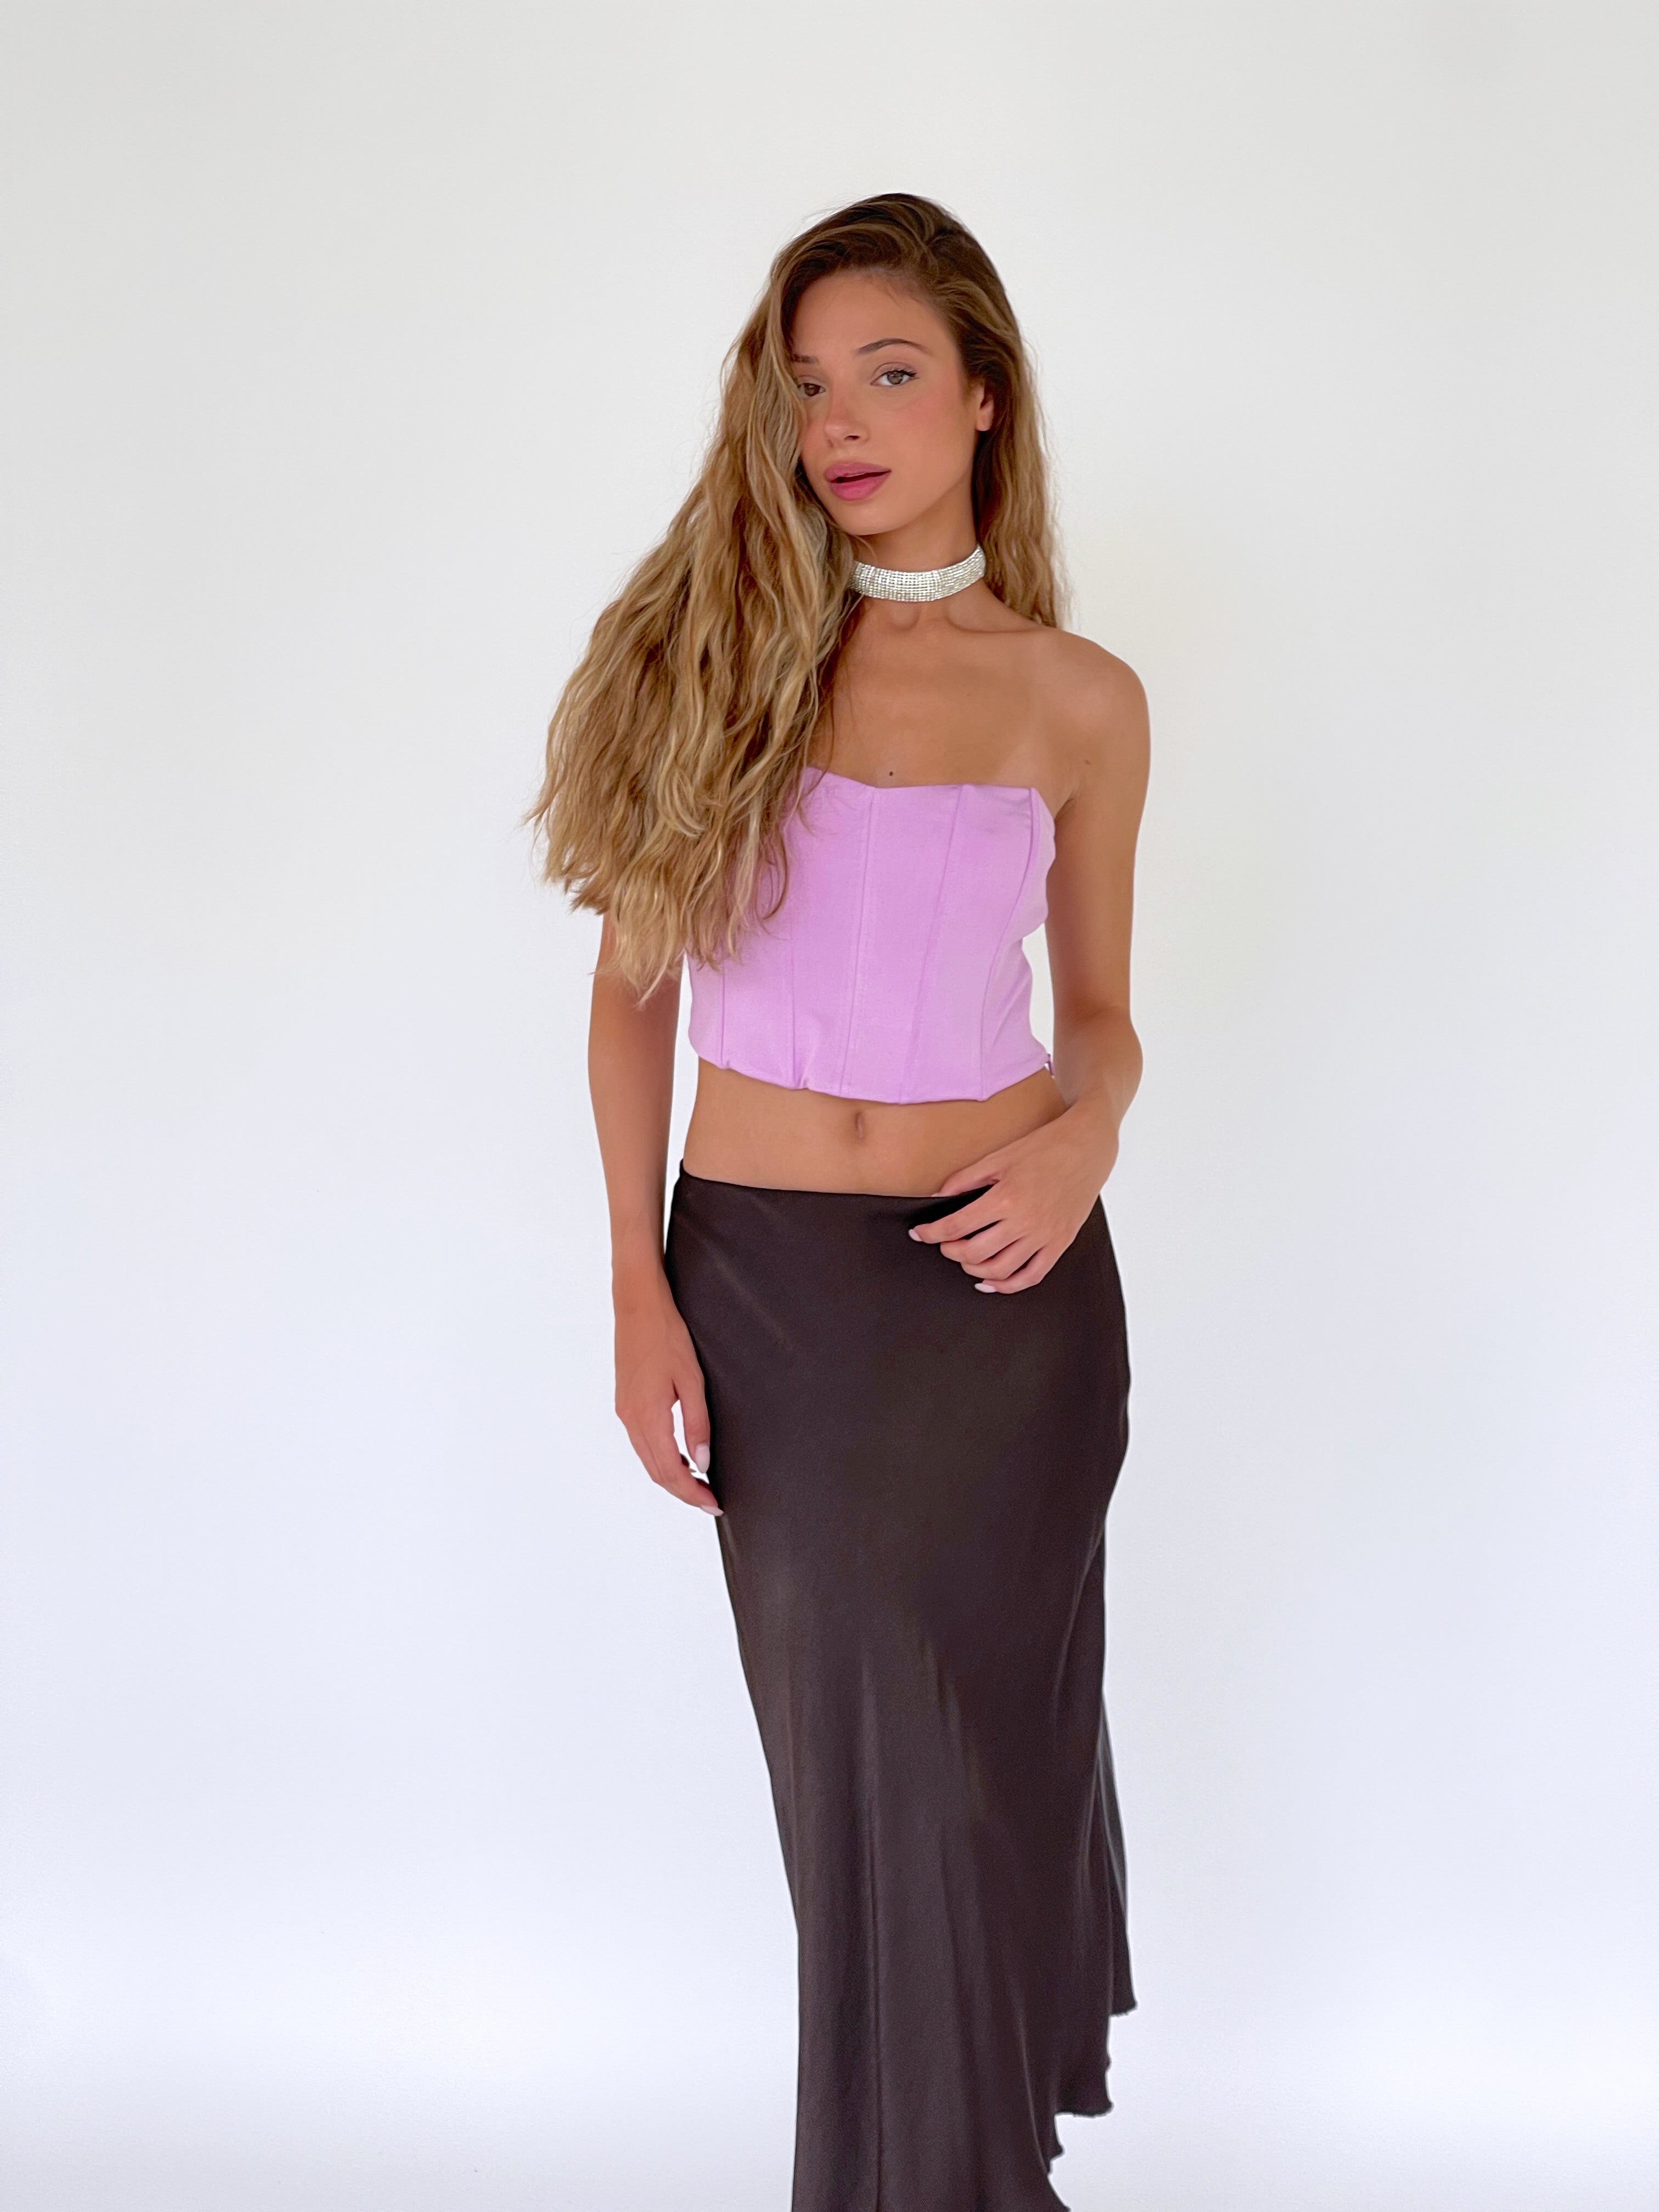 CORSET TOP IN LILAC